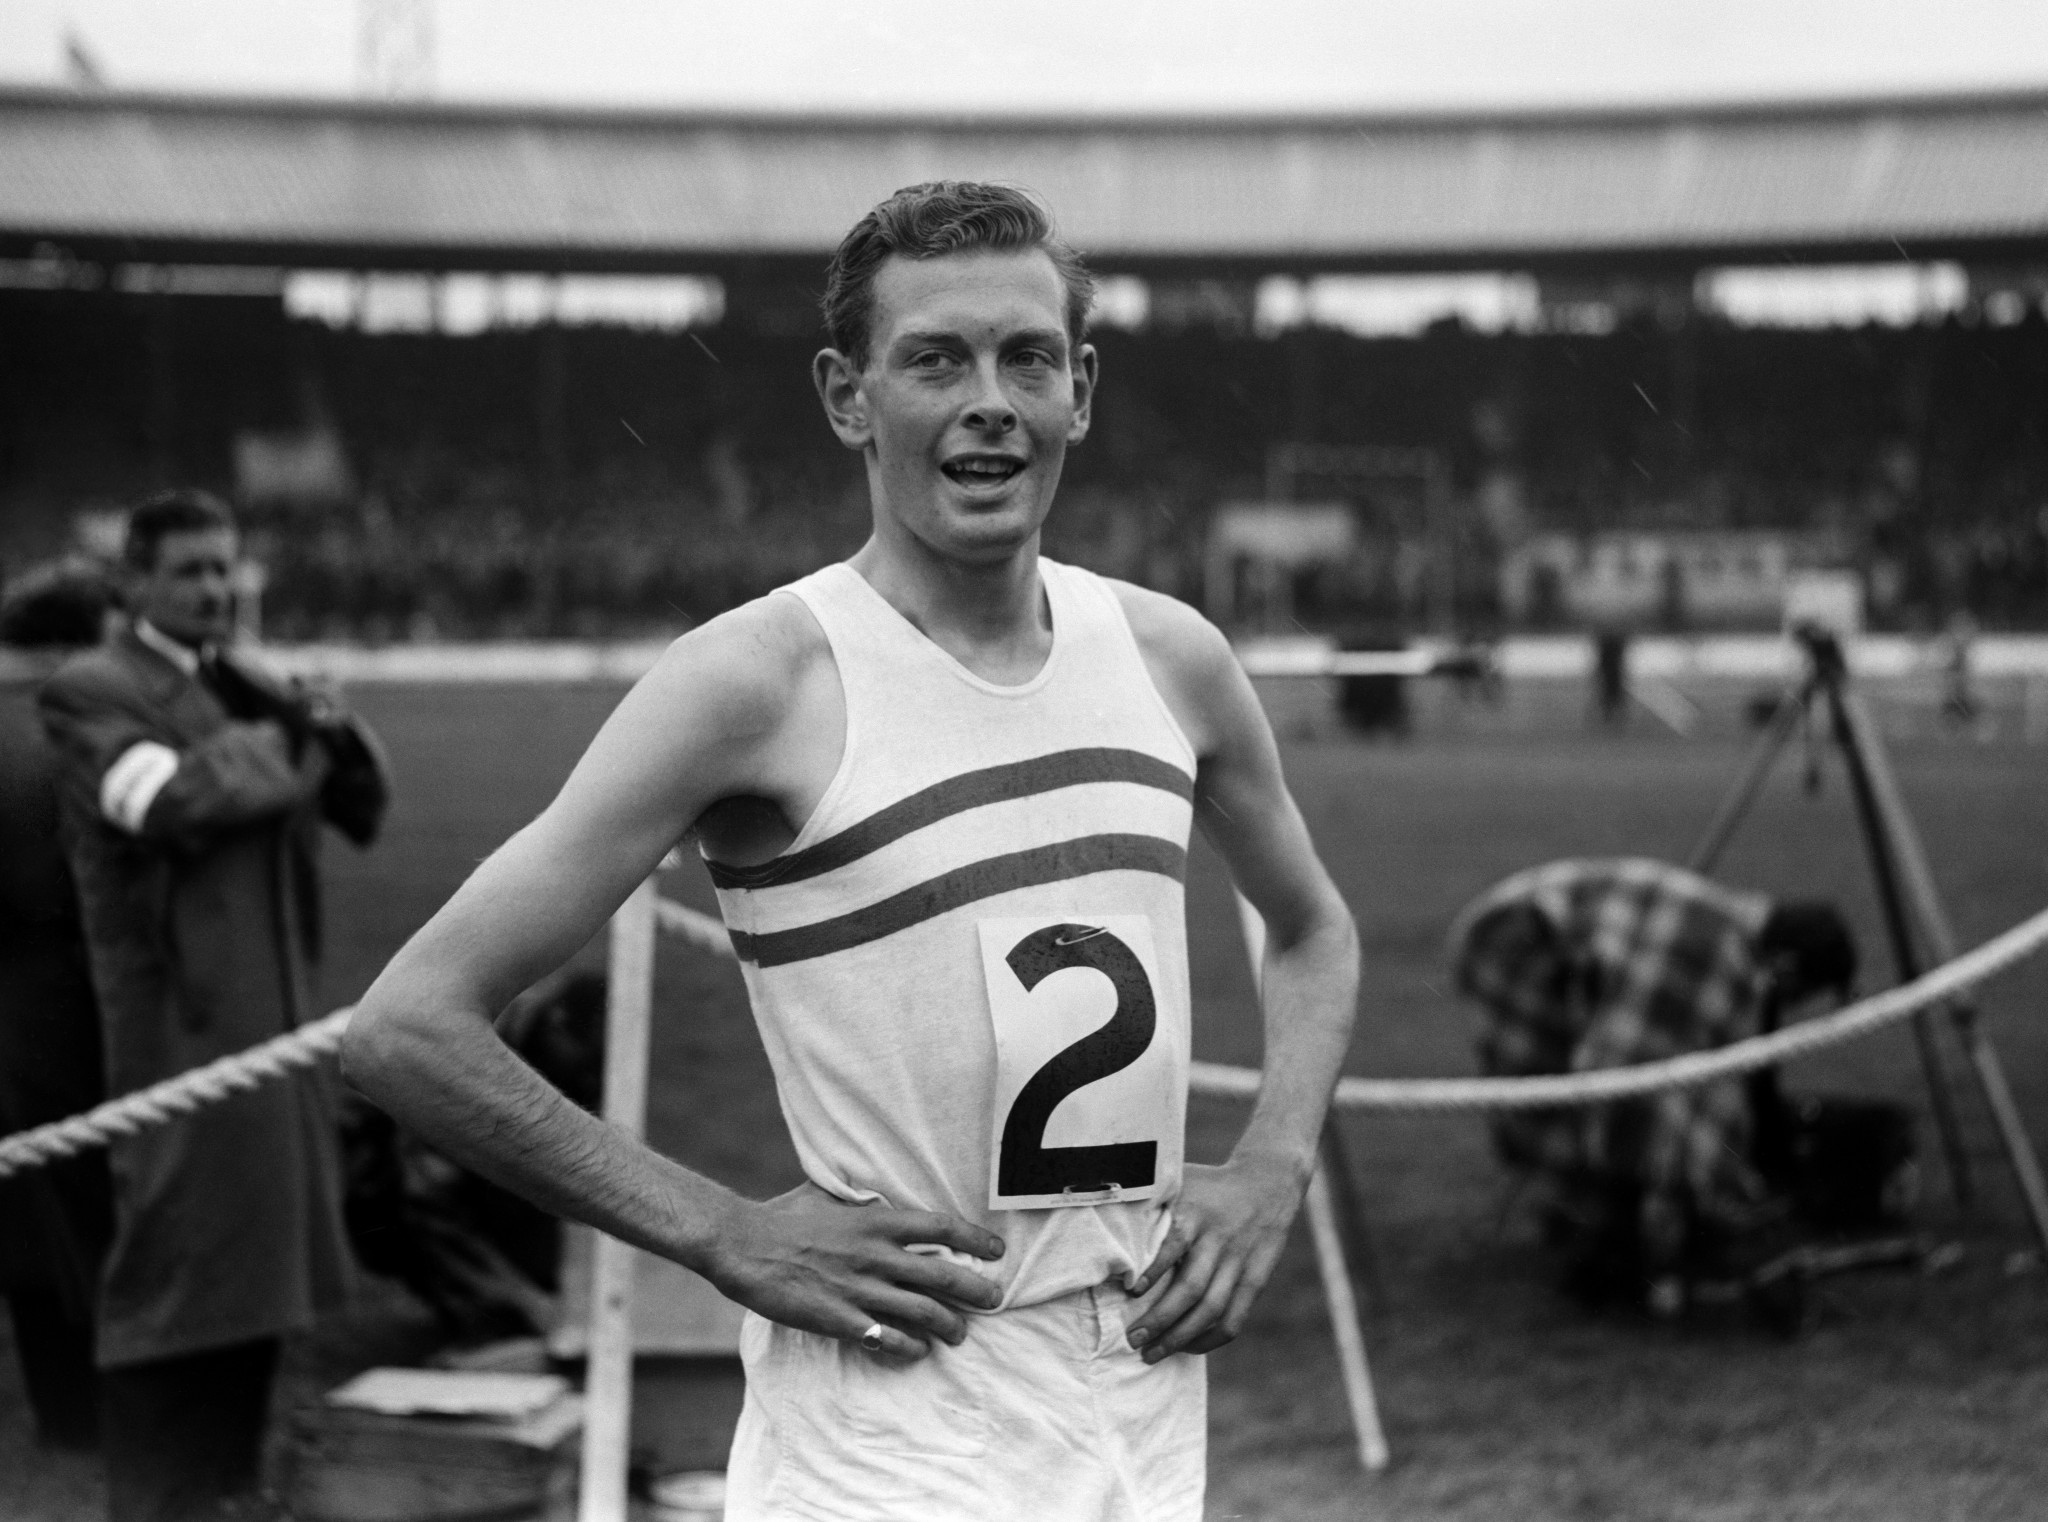 Brian Hewson was the first man to run a sub-four minute mile and not place in the top two of the race ©Getty Images